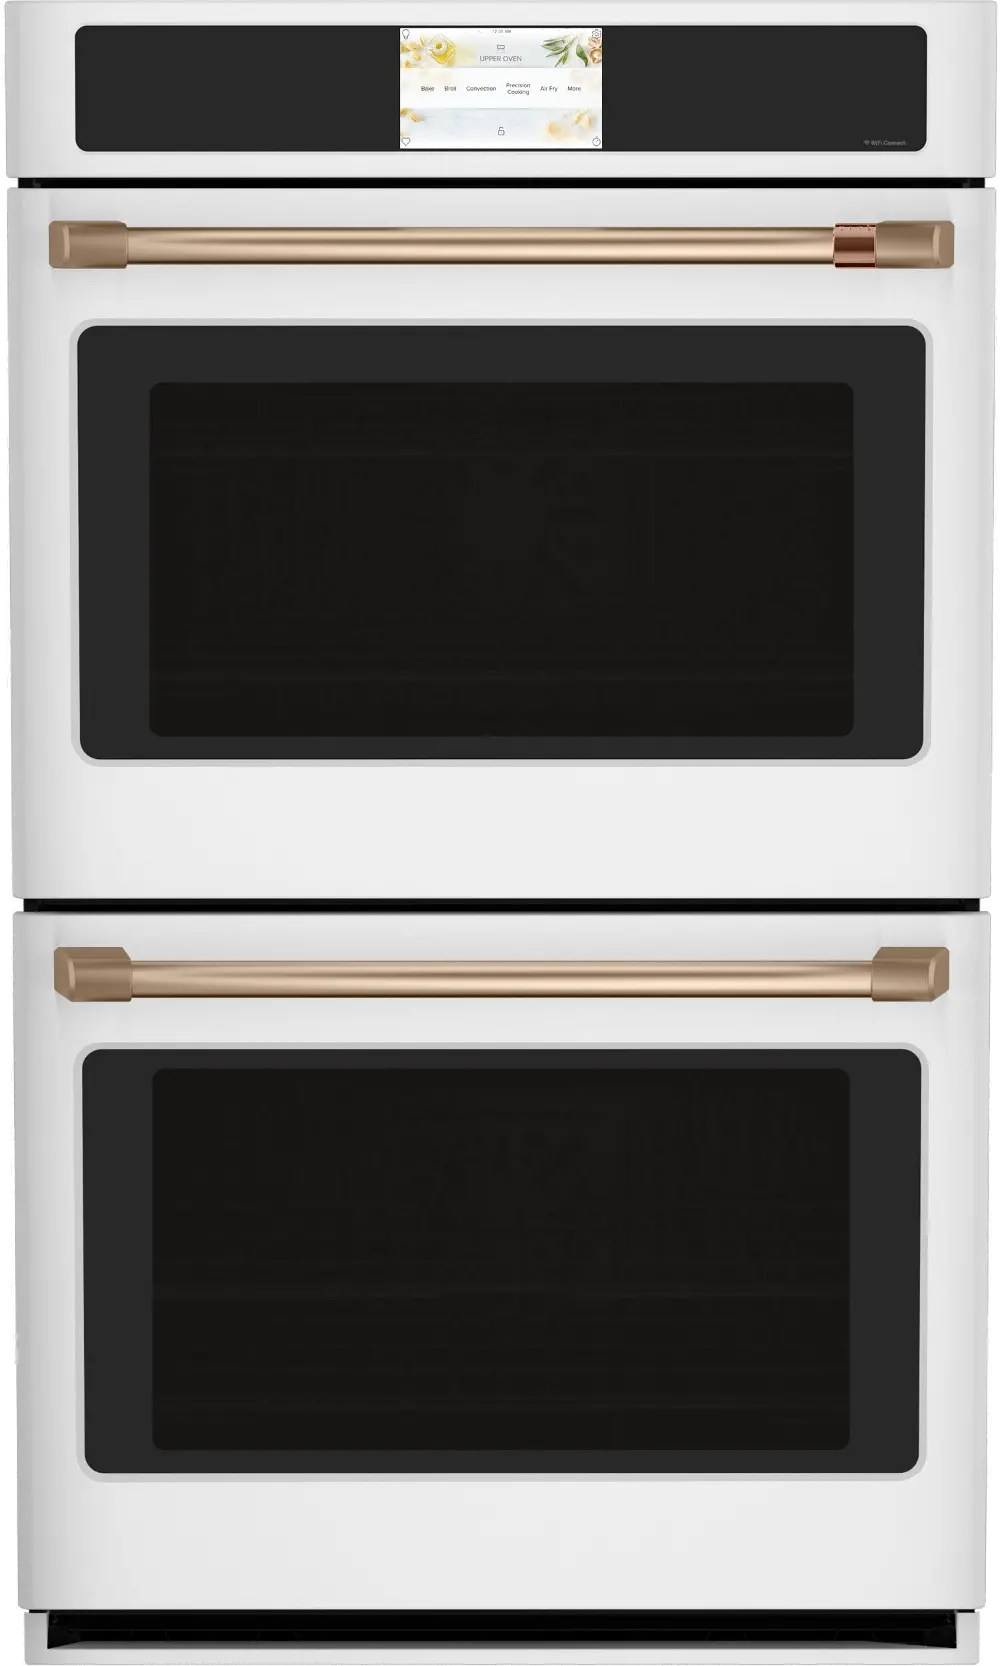 CTD90DP4NW2 Cafe 10 cu ft Double Wall Oven - White 30 Inch-1